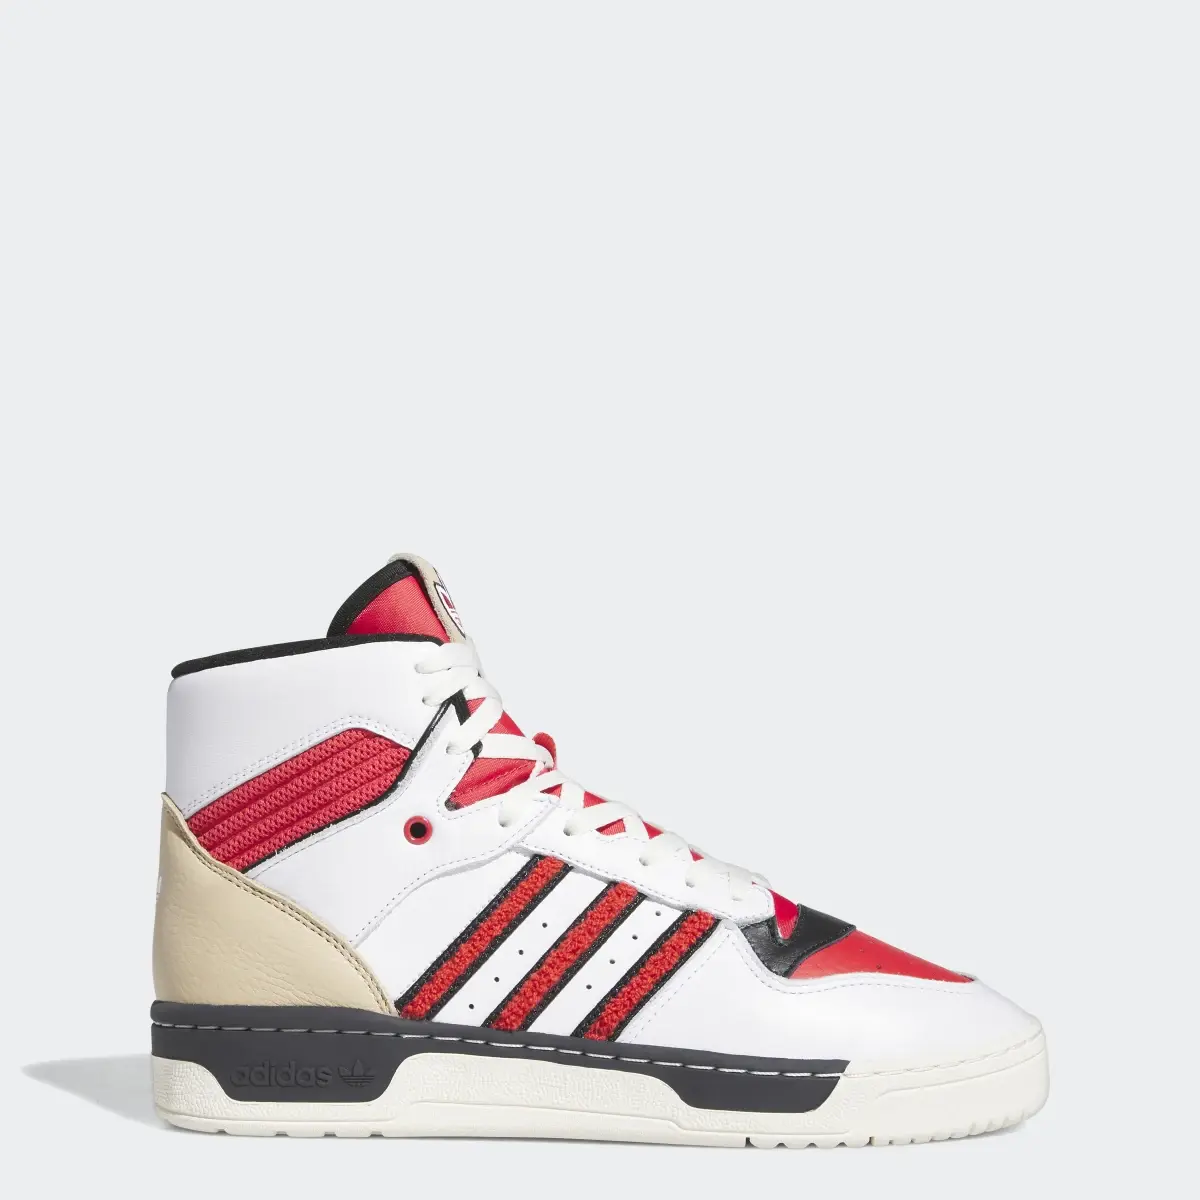 Adidas Rivalry High Shoes. 1